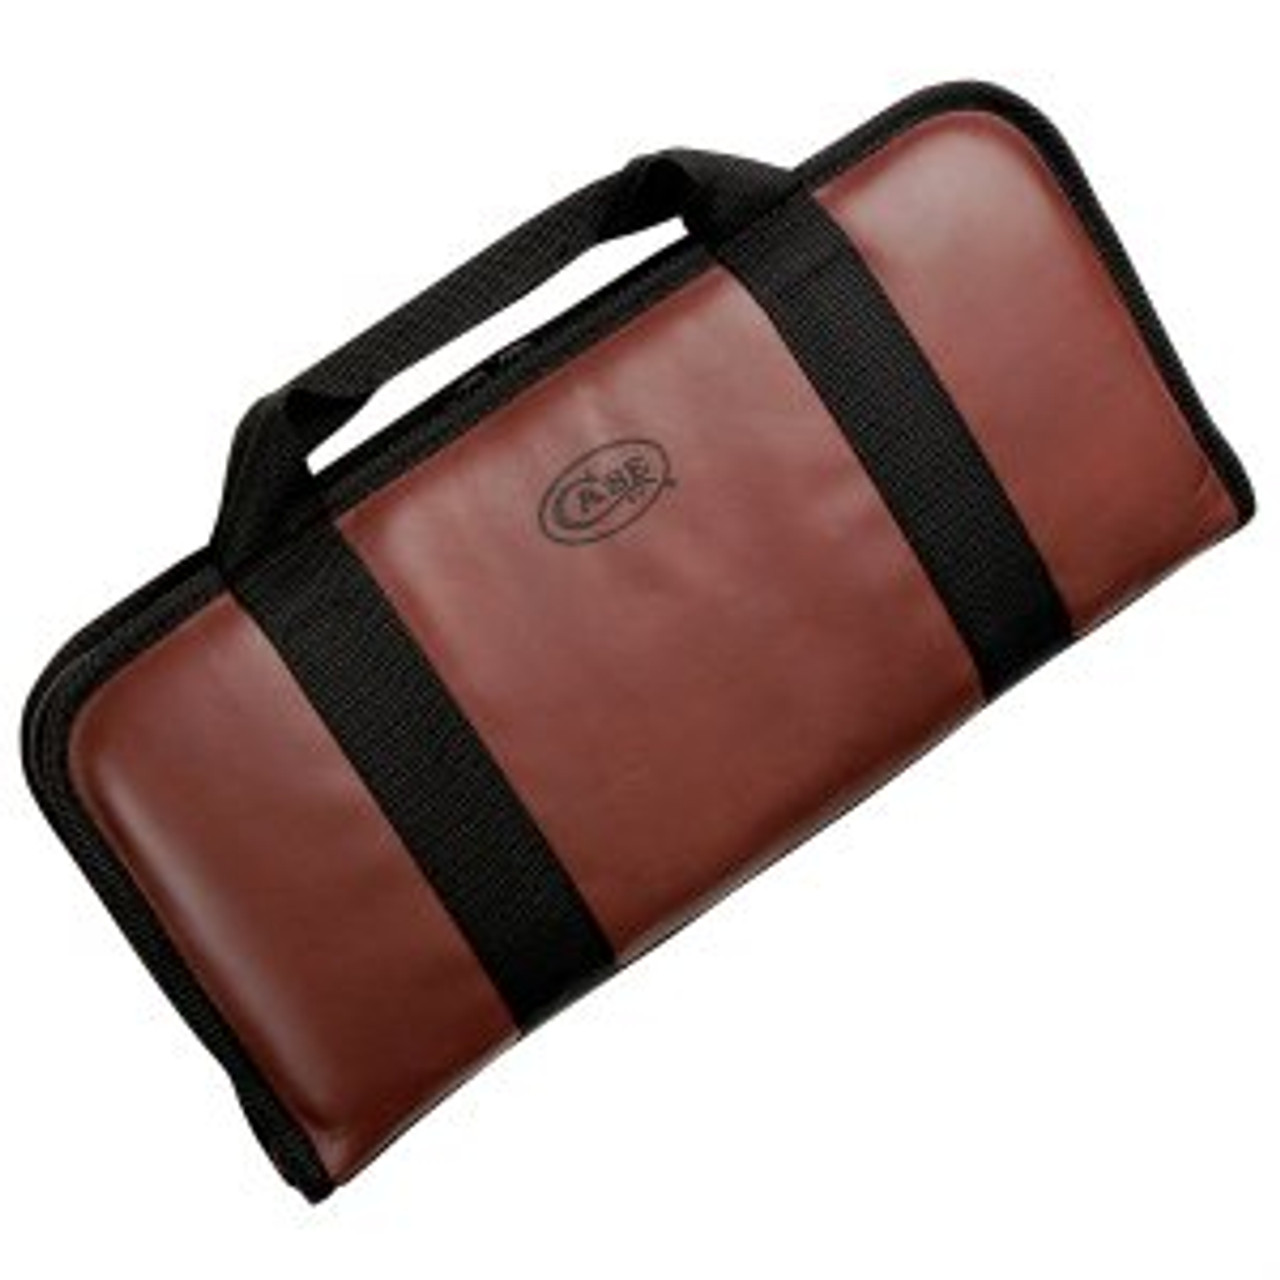 Case 1074 Small Leather Carrying Case